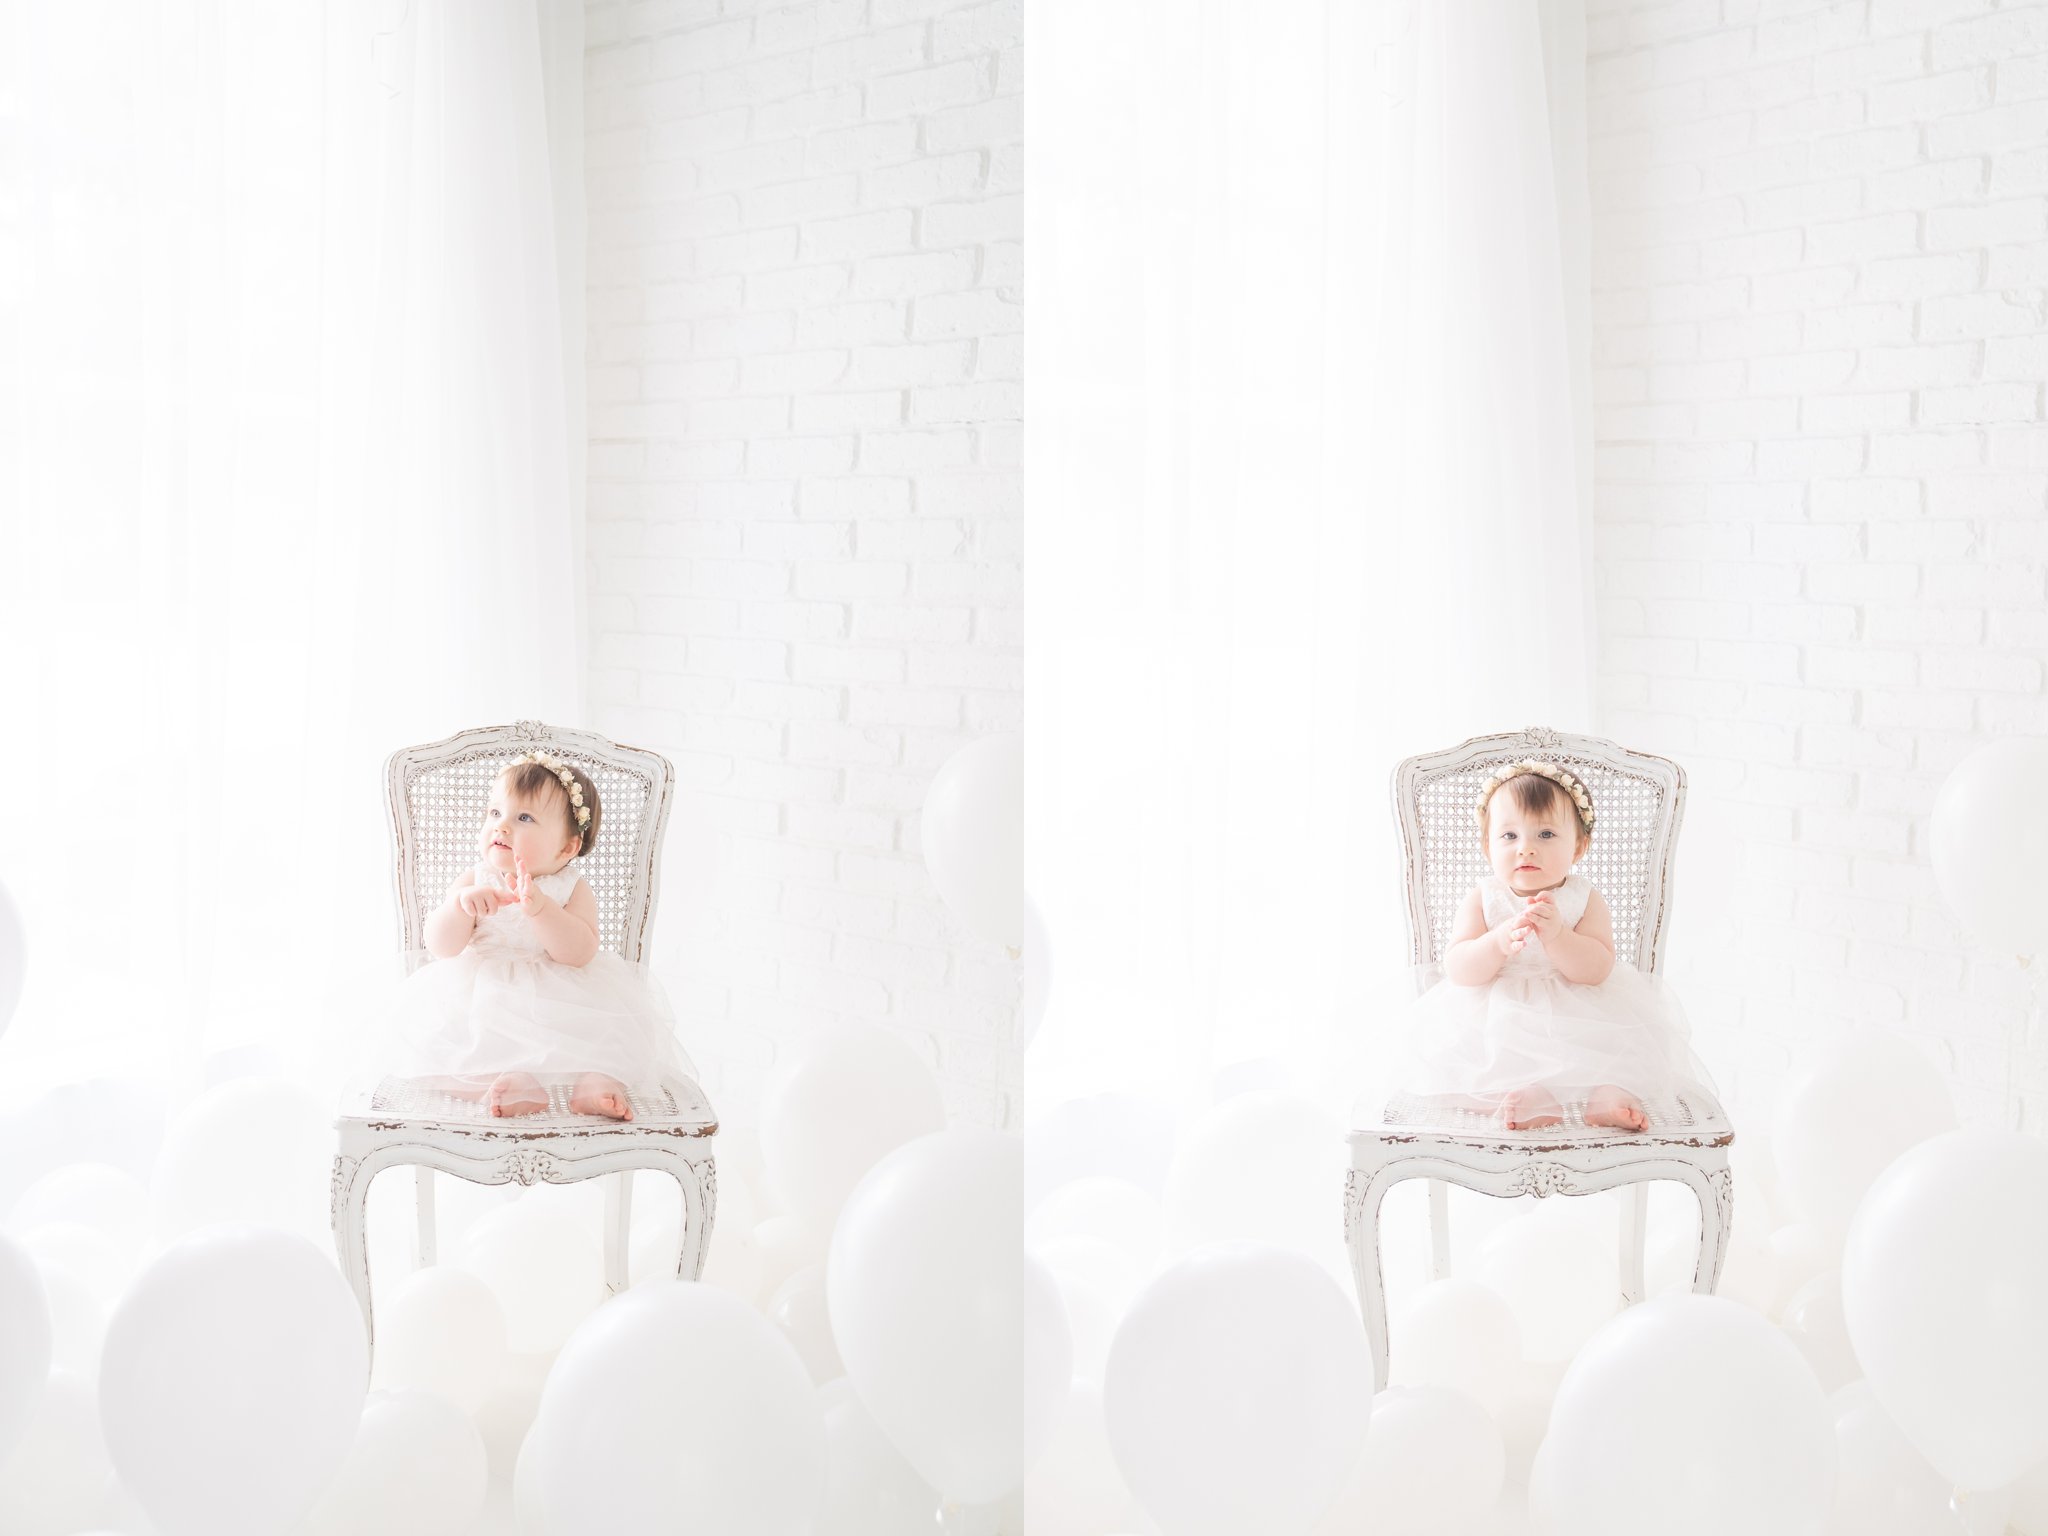 One Year old baby girl playing in a room full of balloons being  photographed in a jupiter florida photography studio.